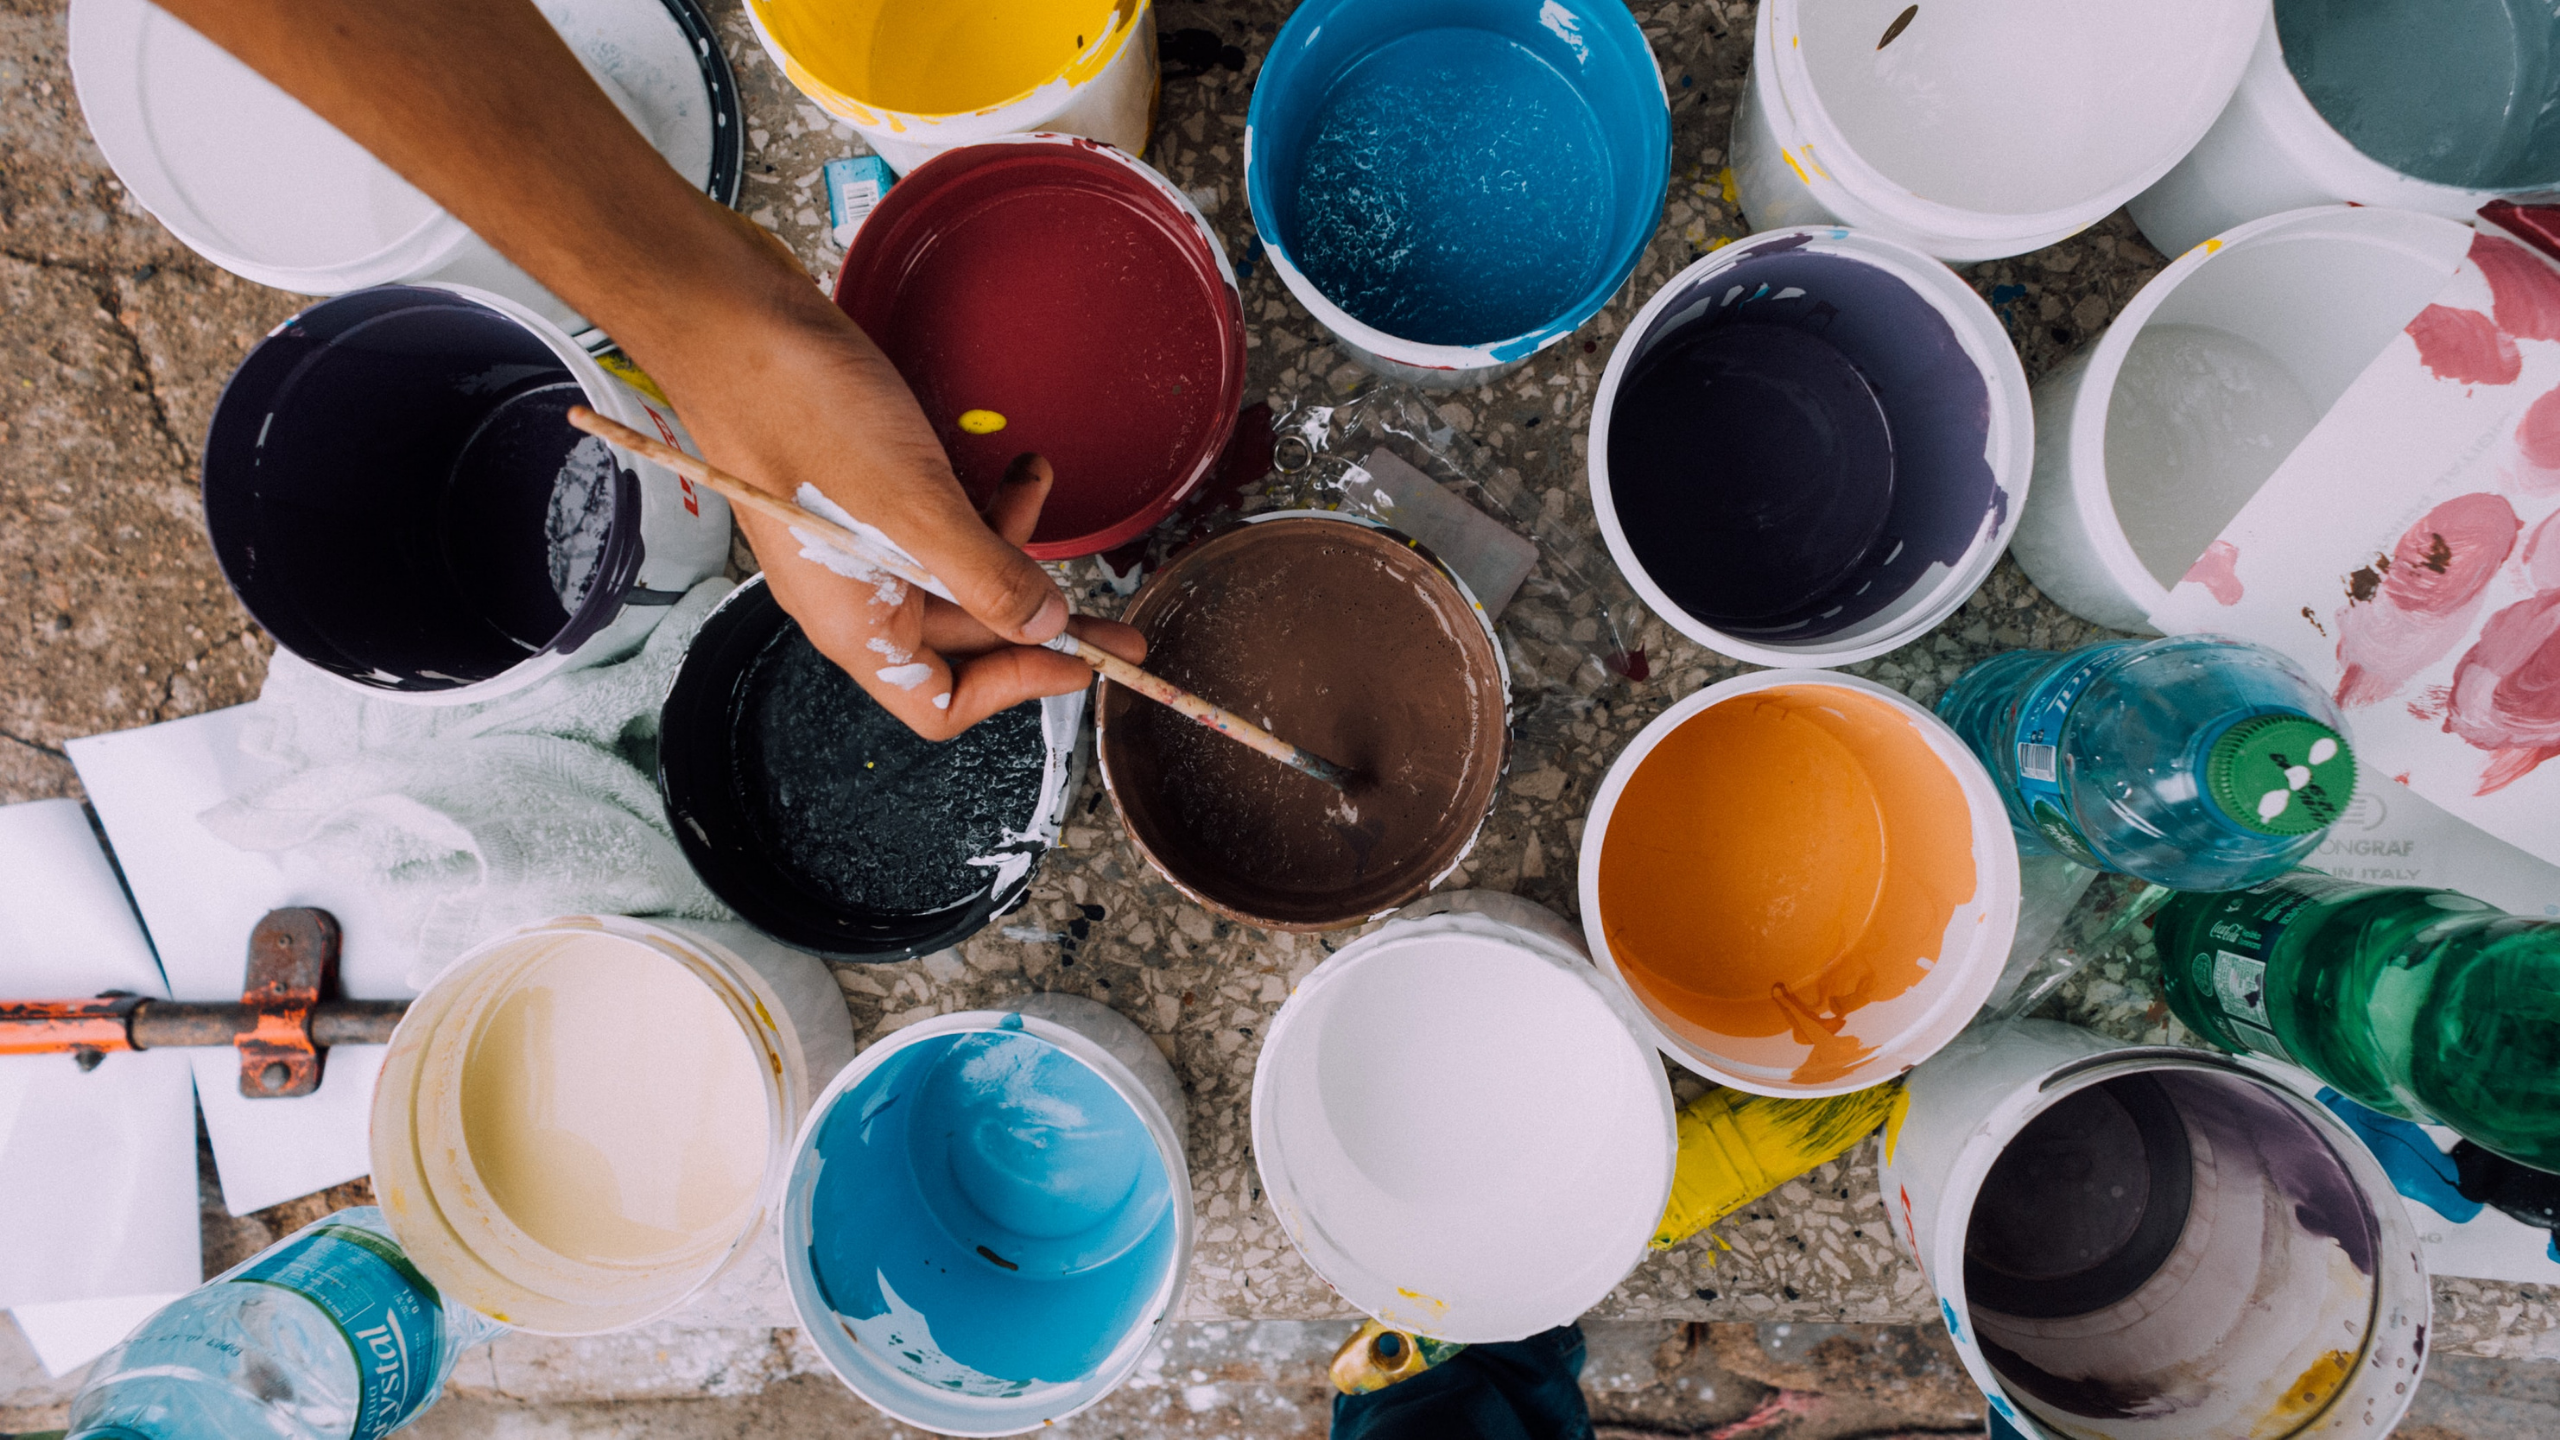 Arts and Crafts for Adults: Its Benefits and Why You Should be Doing It